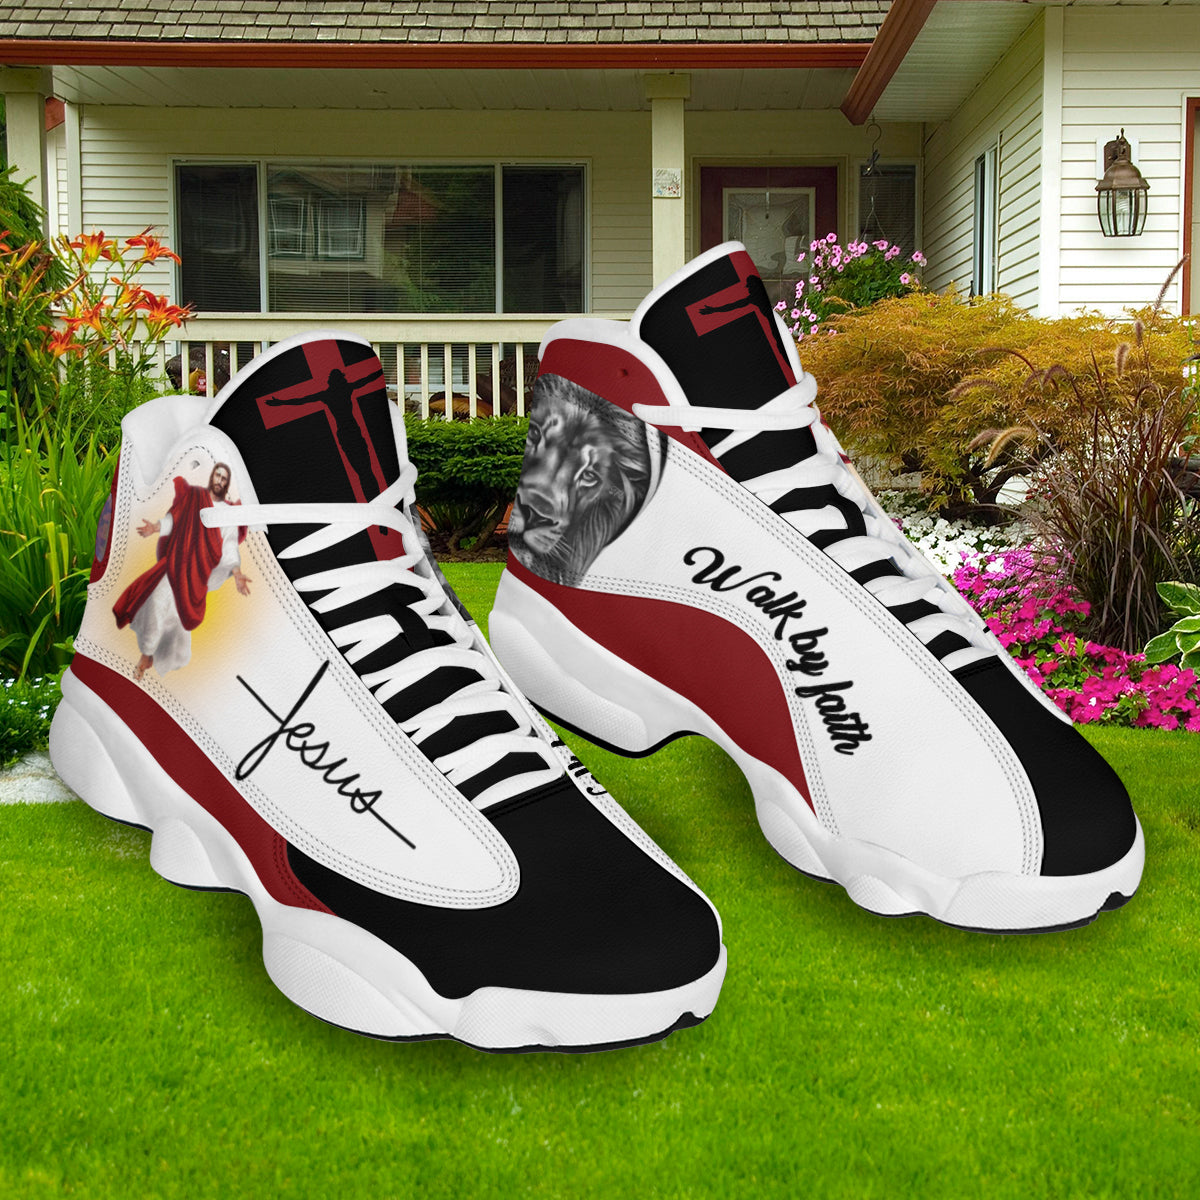 Walk By Faith Jesus And Lion Art Basketball Shoes For Men Women - Christian Shoes - Jesus Shoes - Unisex Basketball Shoes